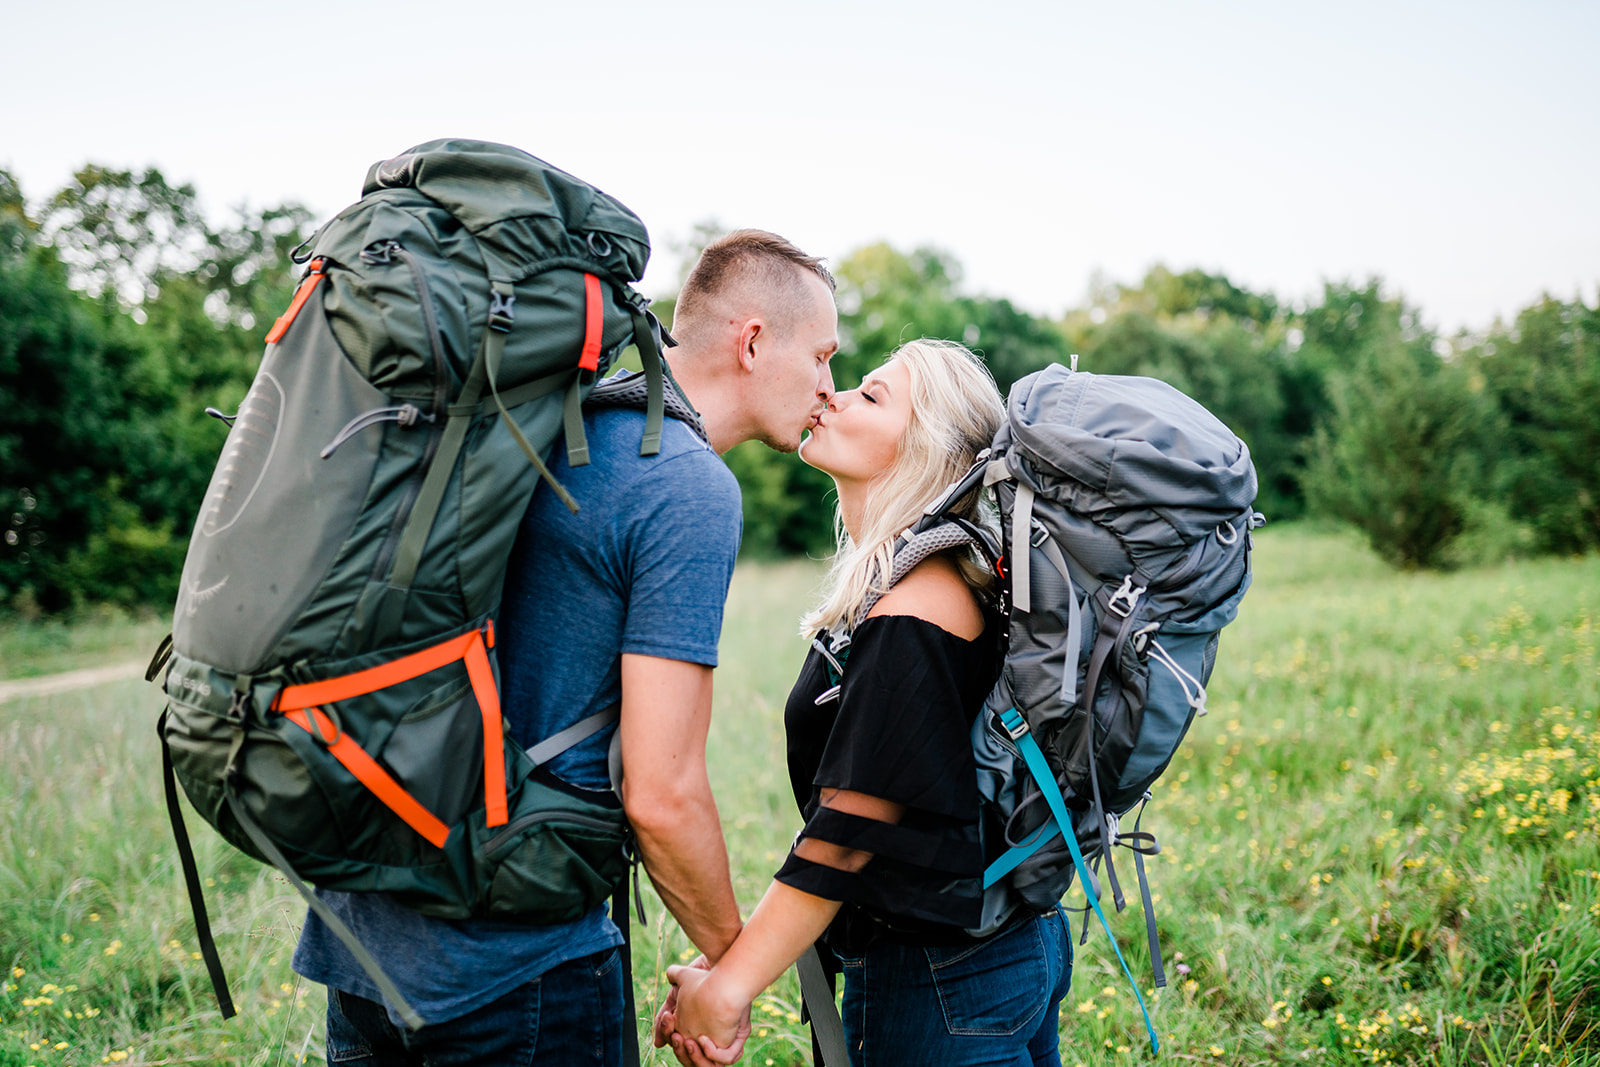 A couple wearing backpacks shares a tender kiss, their love blossoming amidst an adventurous journey. The embrace speaks of companionship and affection, as they pause to celebrate their bond against the backdrop of their outdoor exploration.